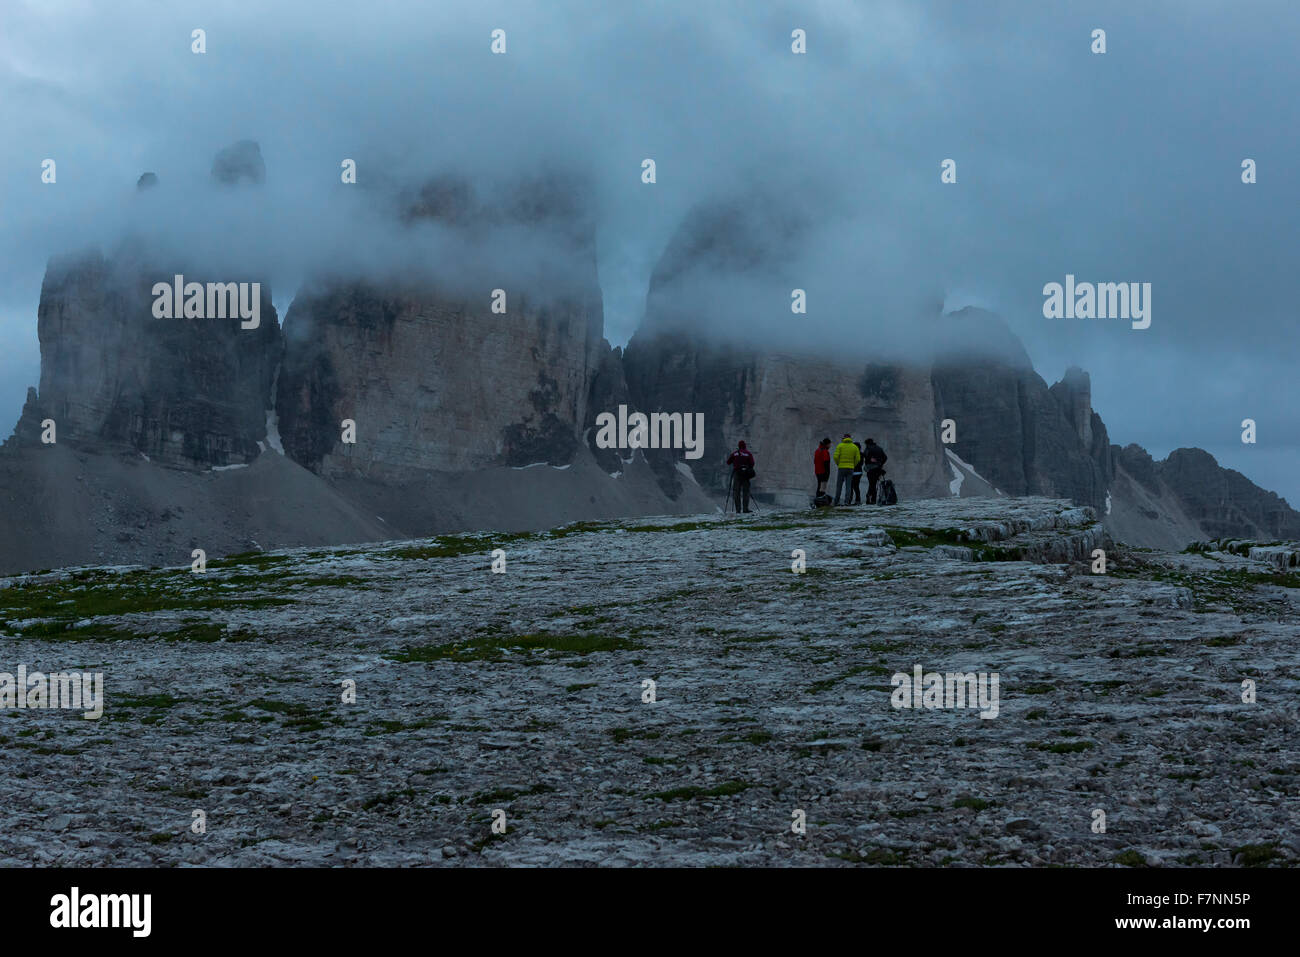 Italy, Alto Adige, Dolomites, group of five hikers in front of Tre Cime di Lavaredo on a cloudy day Stock Photo